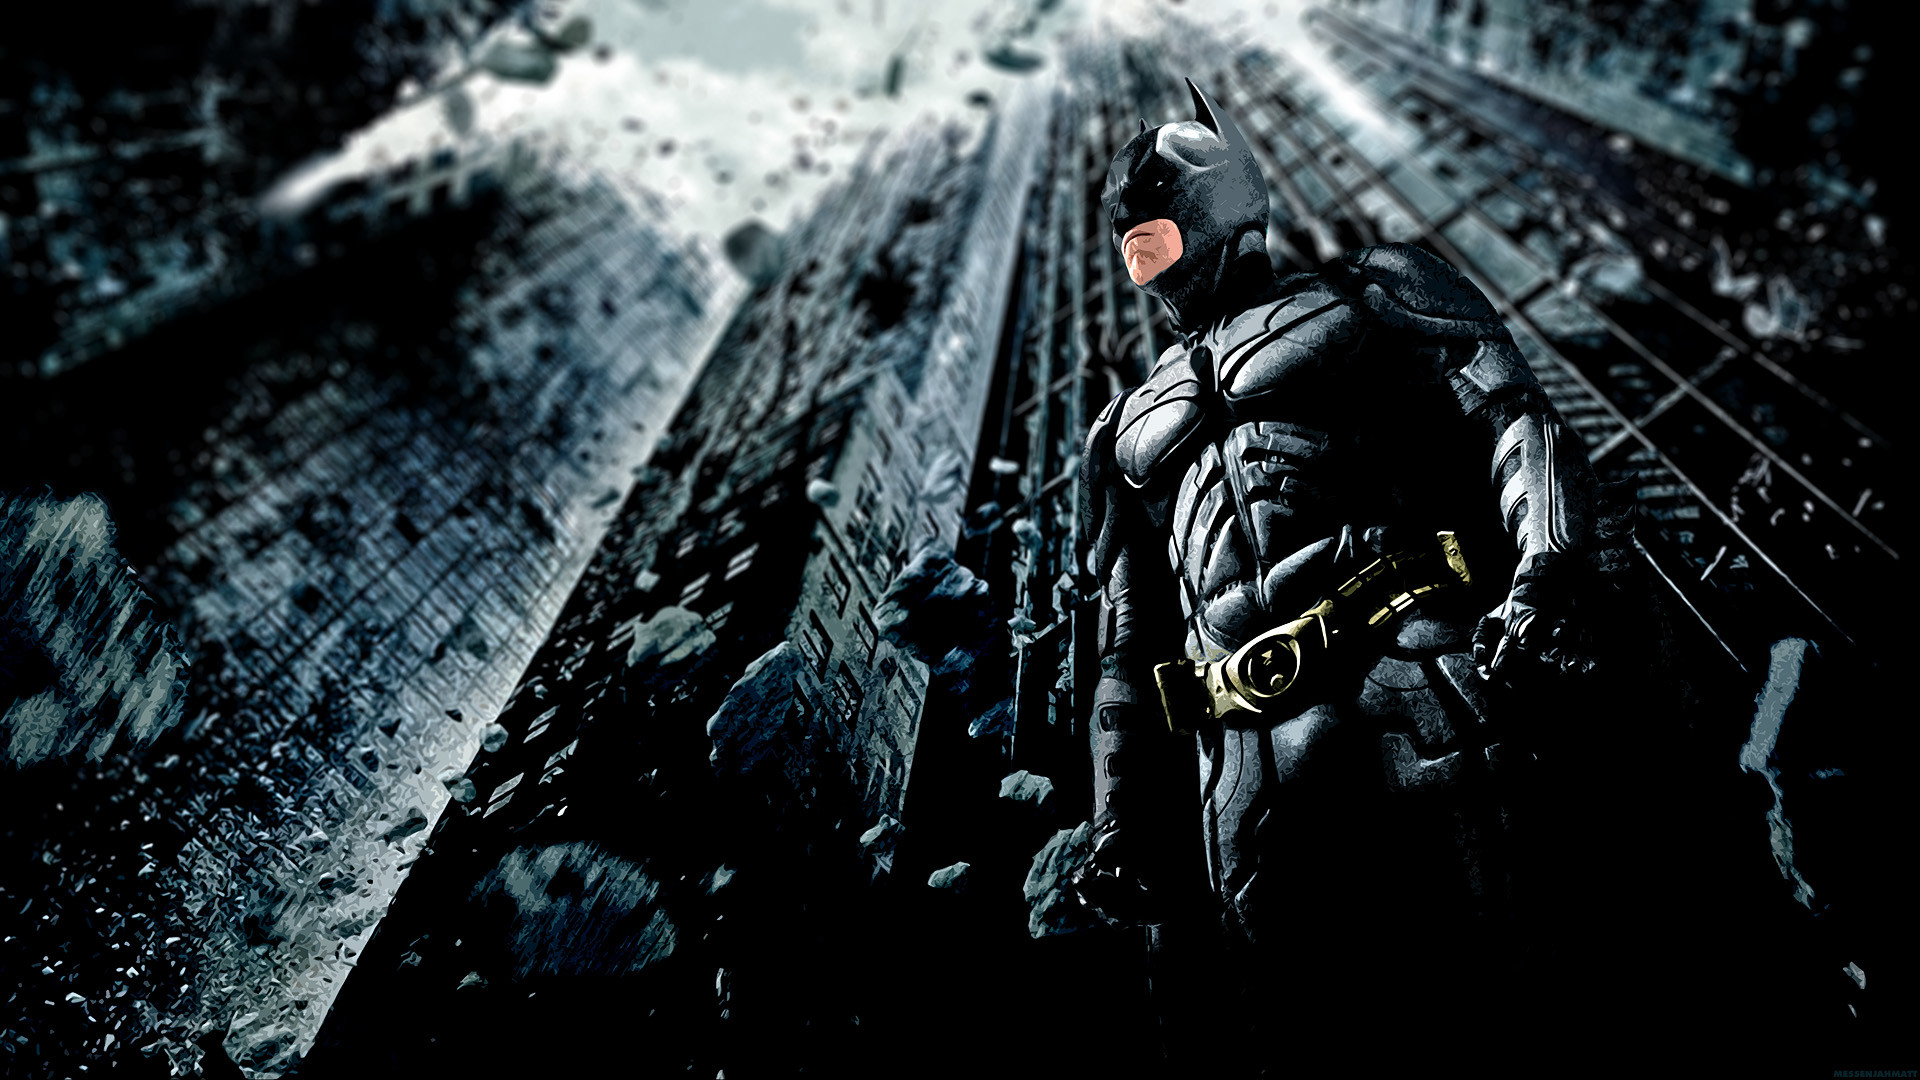 batman hd wallpapers for pc,batman,darkness,fictional character,movie,justice league